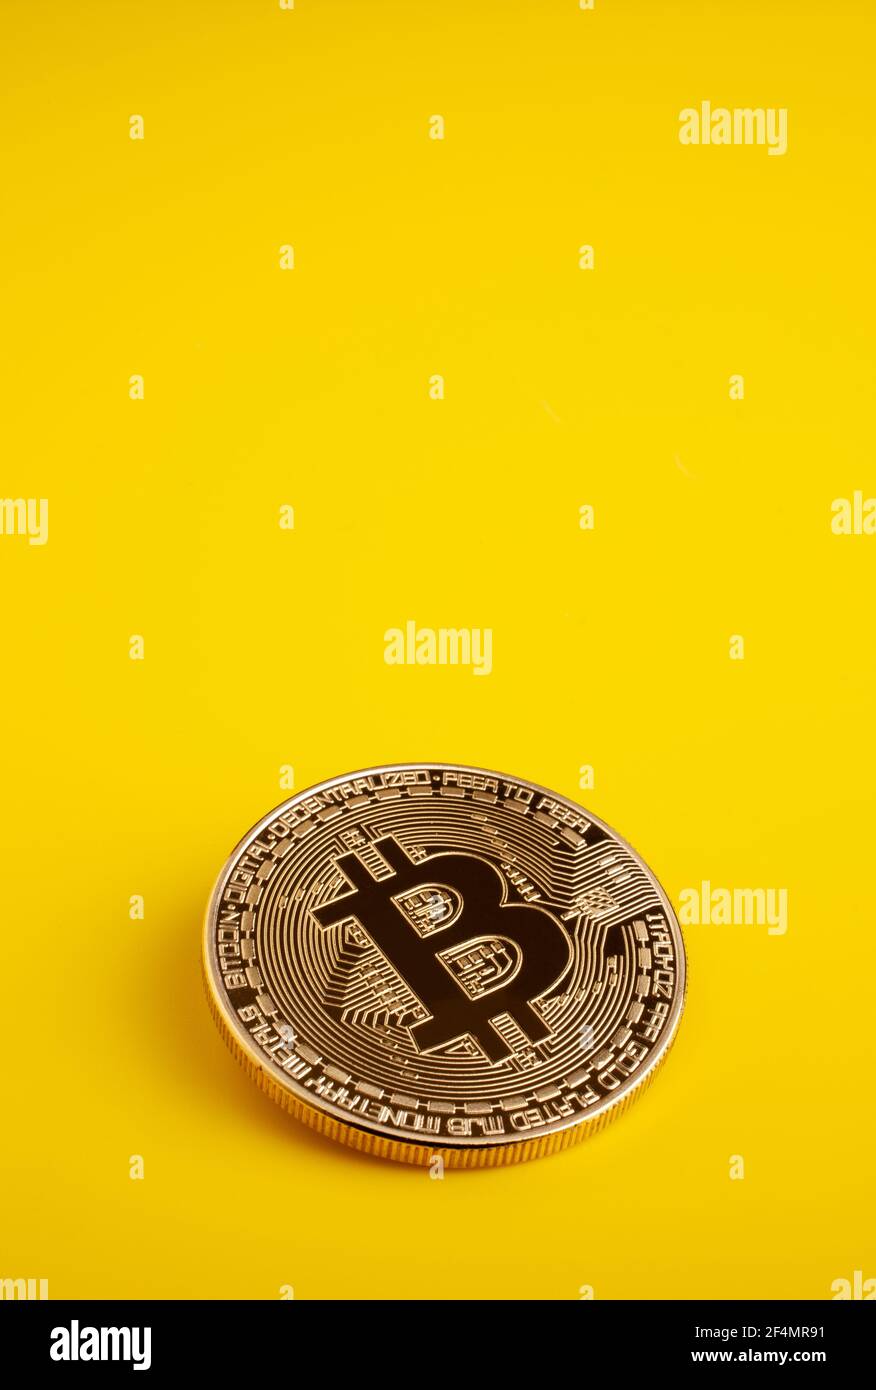 Golden bitcoin on a yellow background Stock Photo